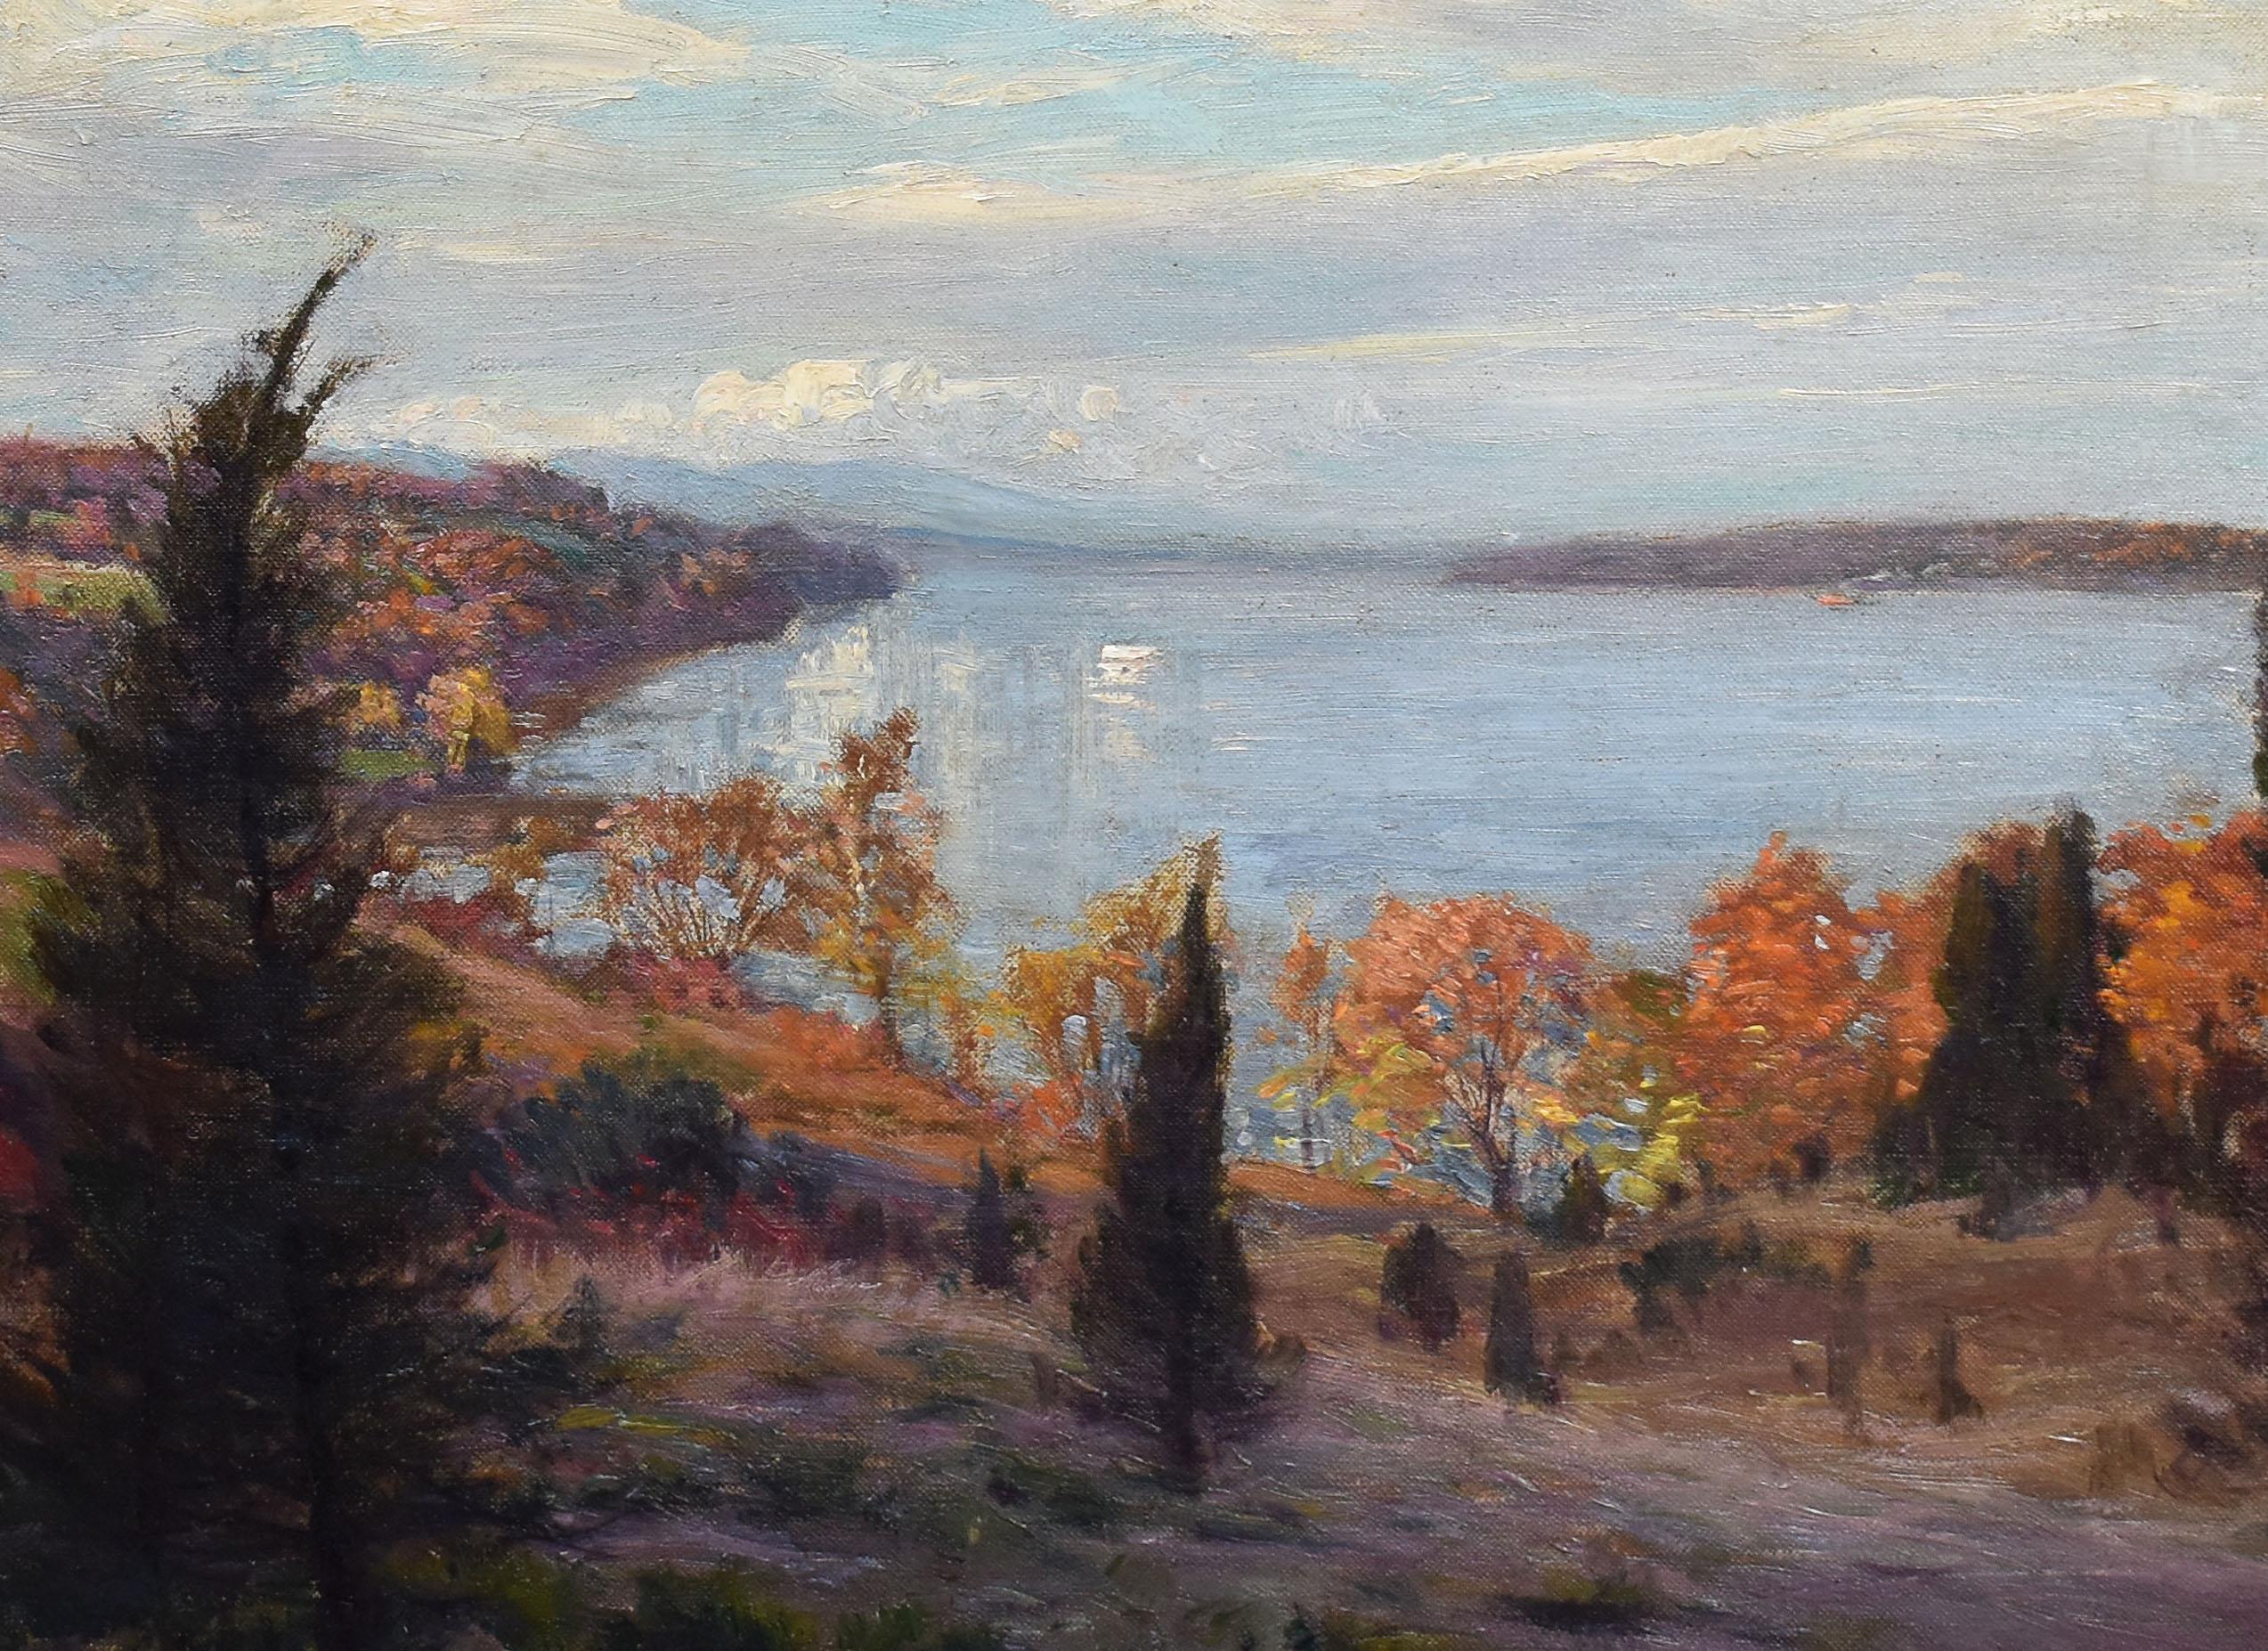 Antique American school impressionist fall landscape painting by Hal Robinson  (1867 - 1933).  Oil on canvas, circa 1900. Signed.  Displayed in a period frame. Image size, 20